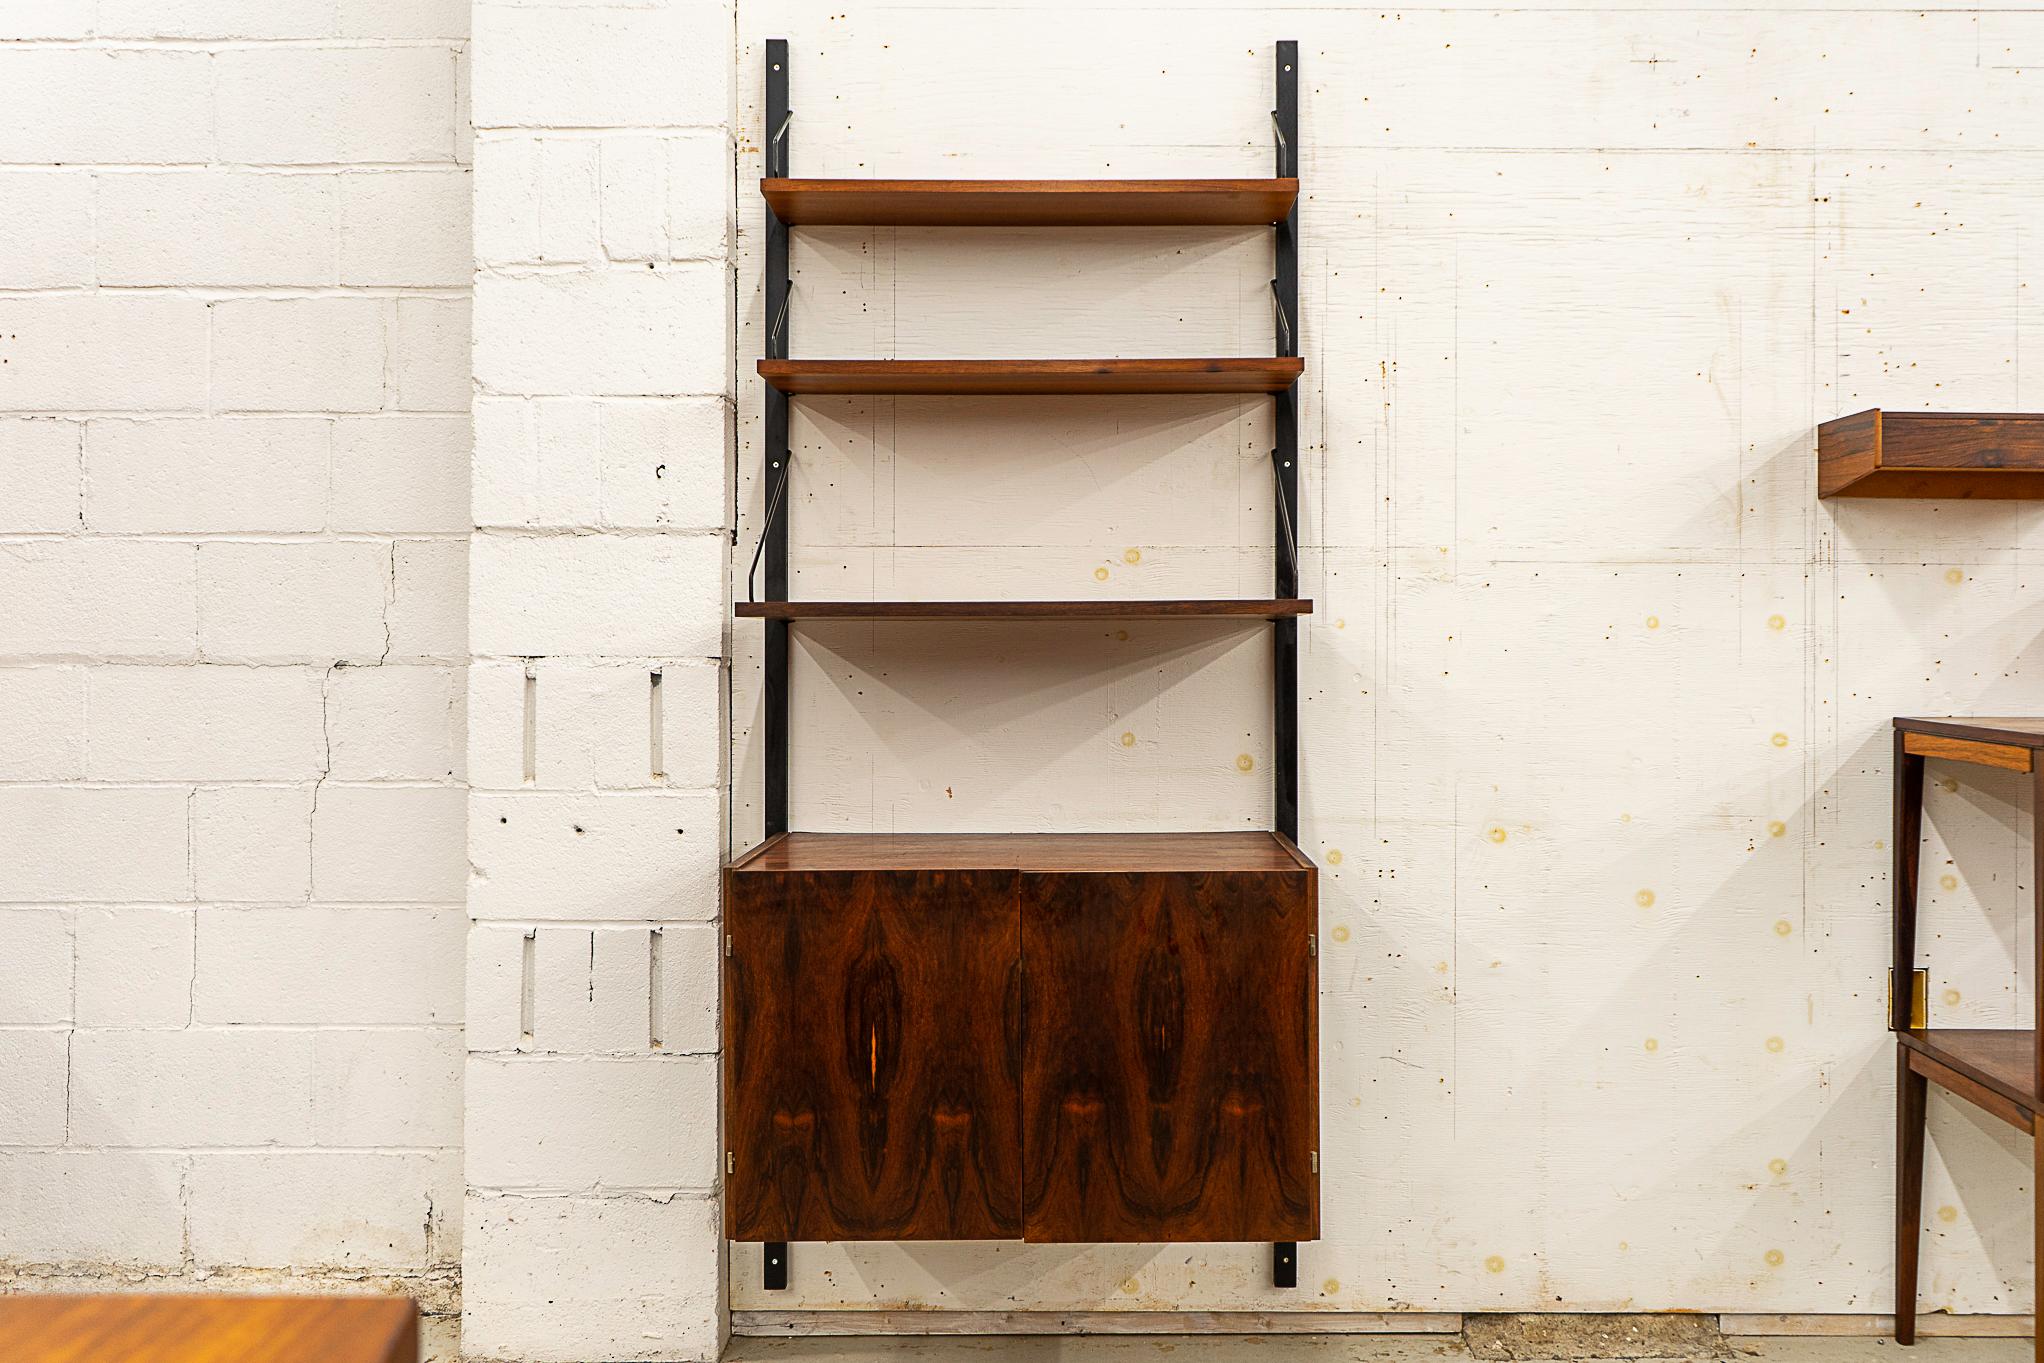 Rosewood Danish wall system, circa 1960's. Double door cabinet with beautiful bookmatched veneer, interior shelf and open cubby. Three height adjustable shelves with graduating depths of 7